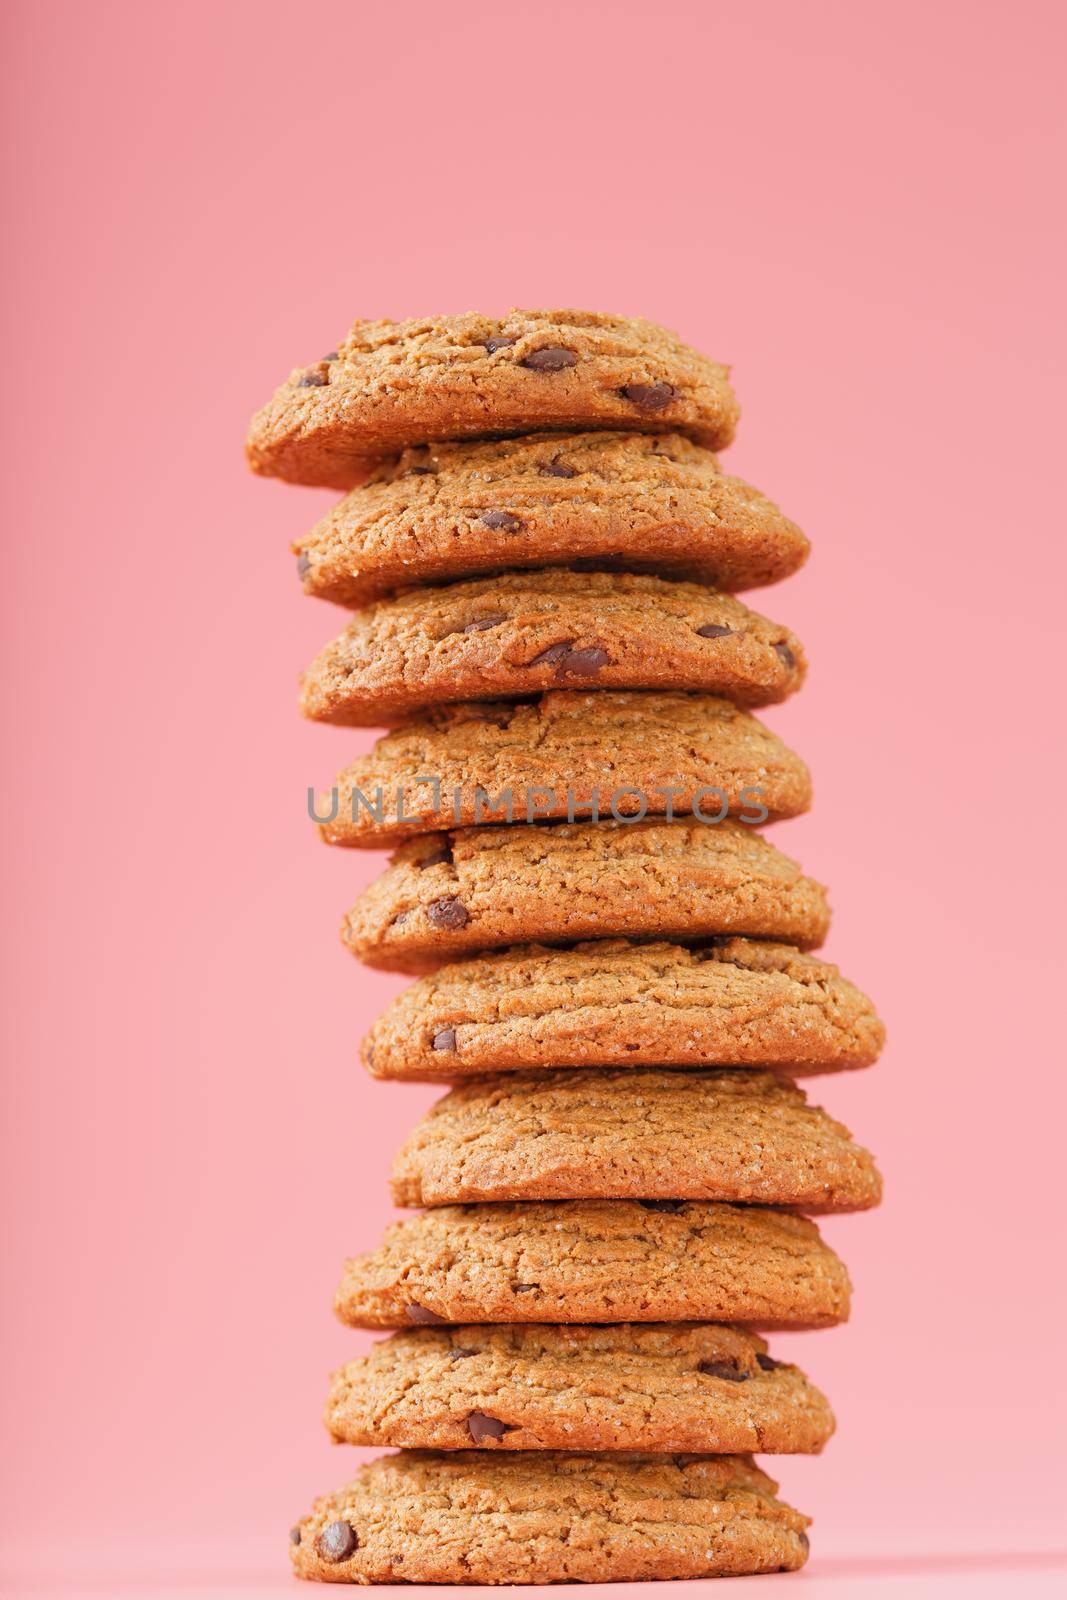 Oatmeal cookies with chocolate are stacked on a pink background. Free space